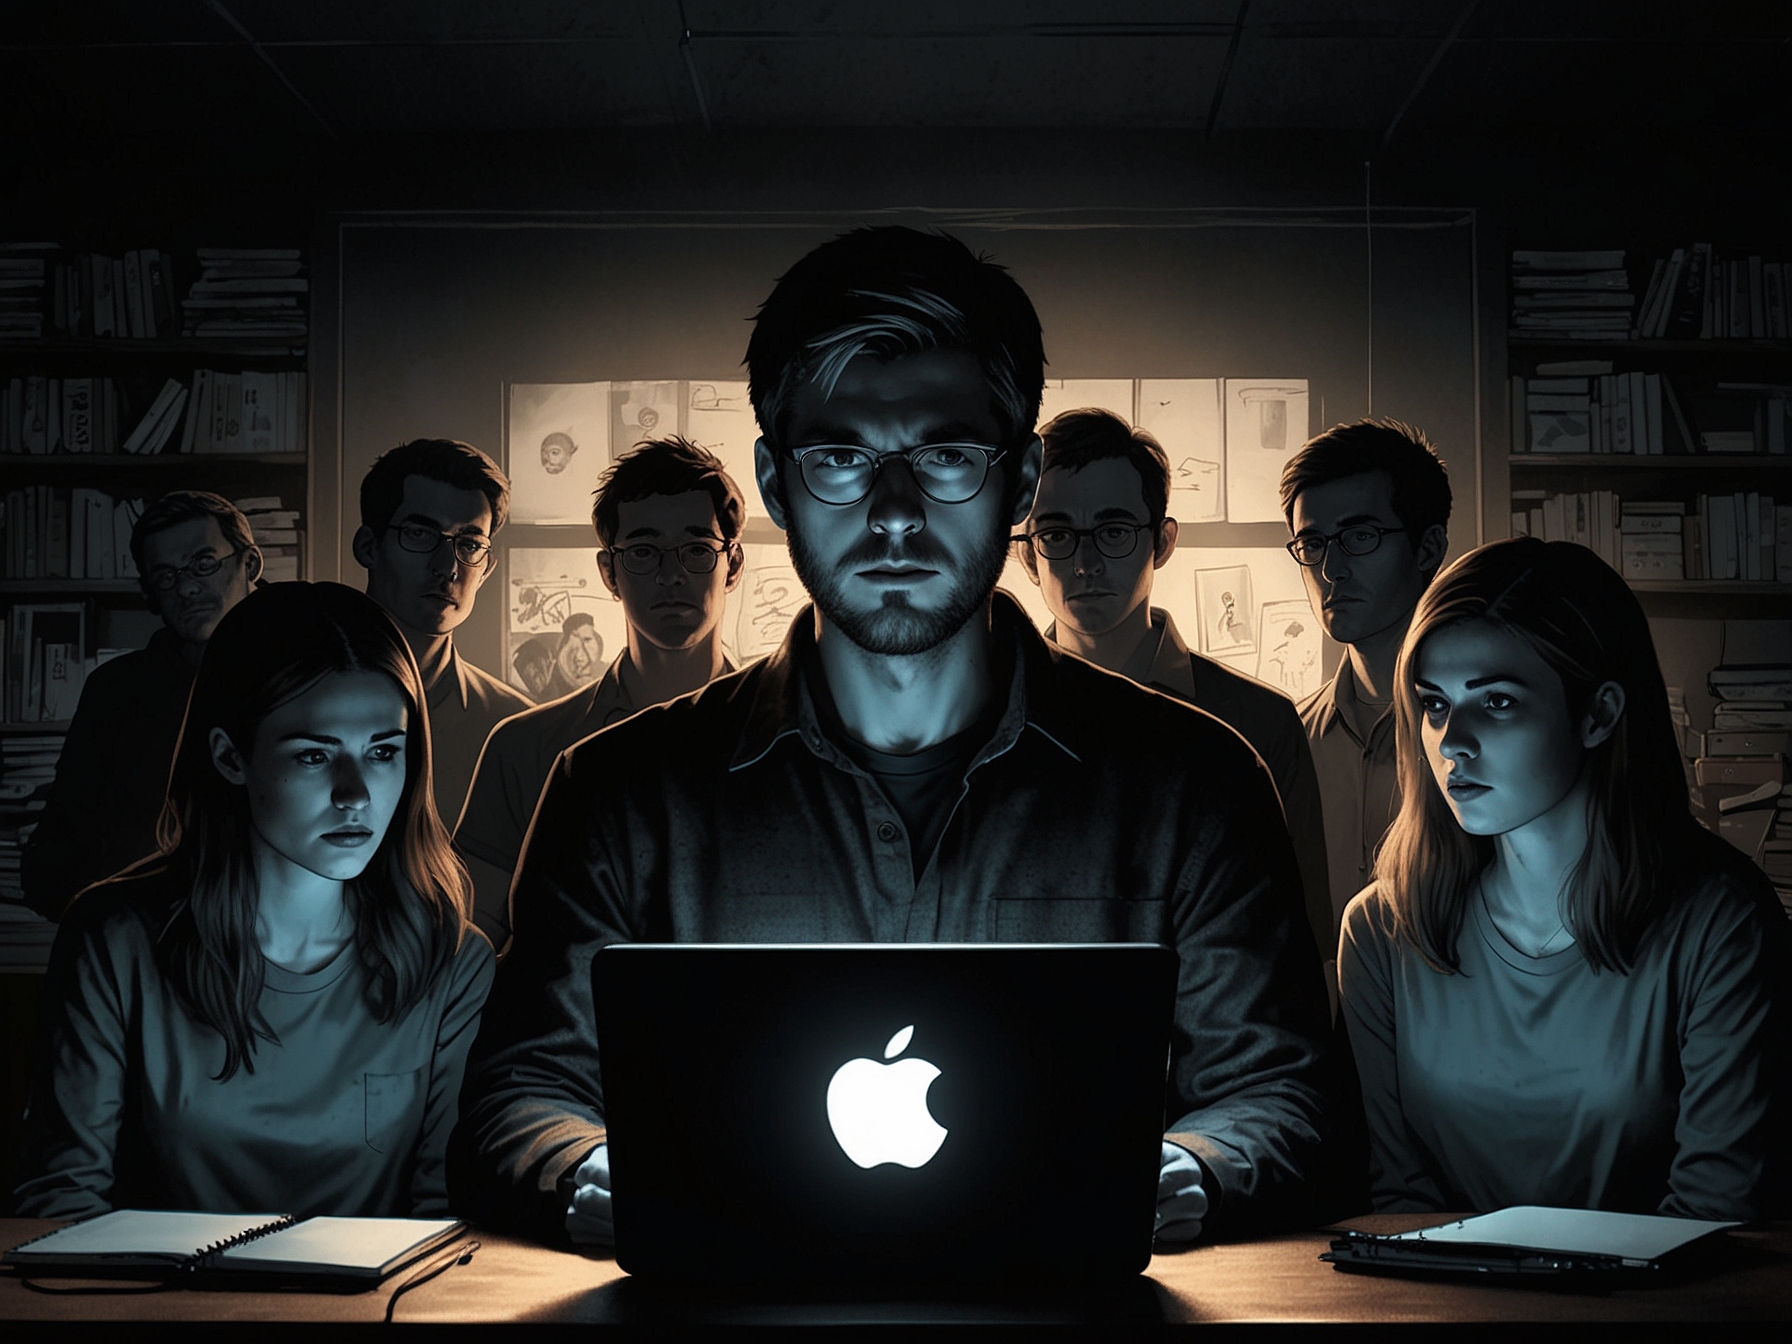 A group of app developers looking frustrated while a shadowy figure representing Apple looms over them. This visual depicts the challenges developers face under Apple's restrictive App Store policies.